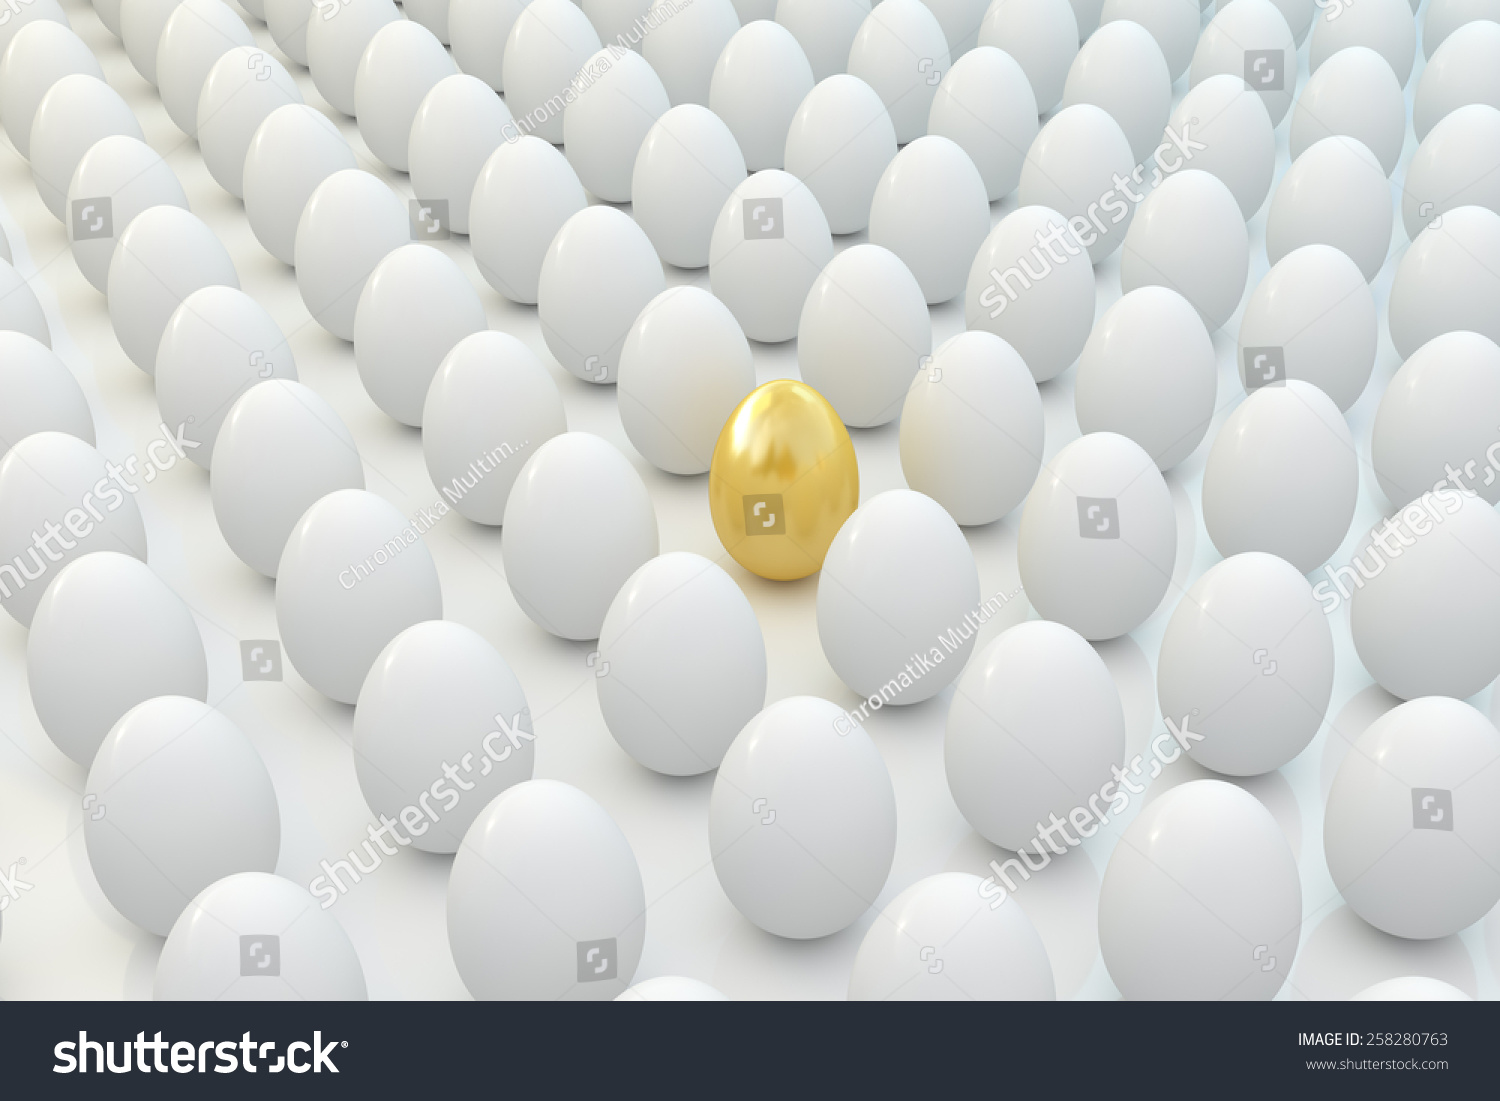 Golden Egg In Line With Other Eggs Stock Photo 258280763 : Shutterstock